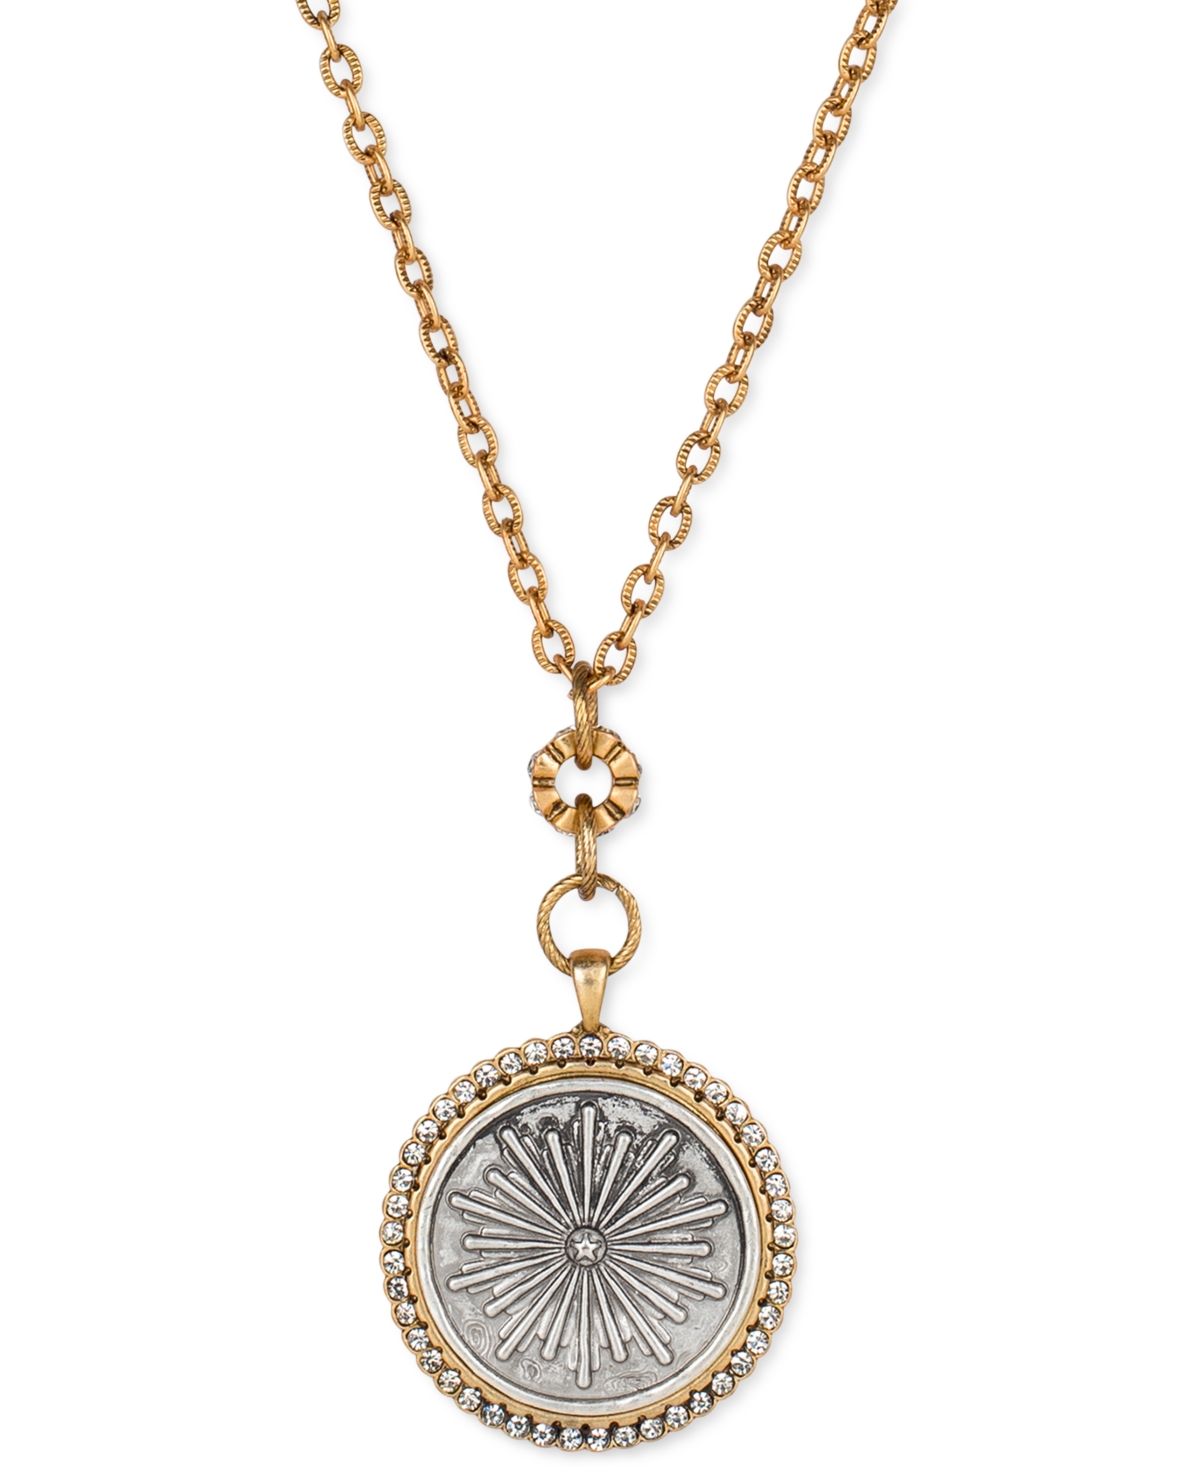 Patricia Nash Two-tone Pave Coin Long Pendant Necklace, 32" + 5" Extender In Med Gray